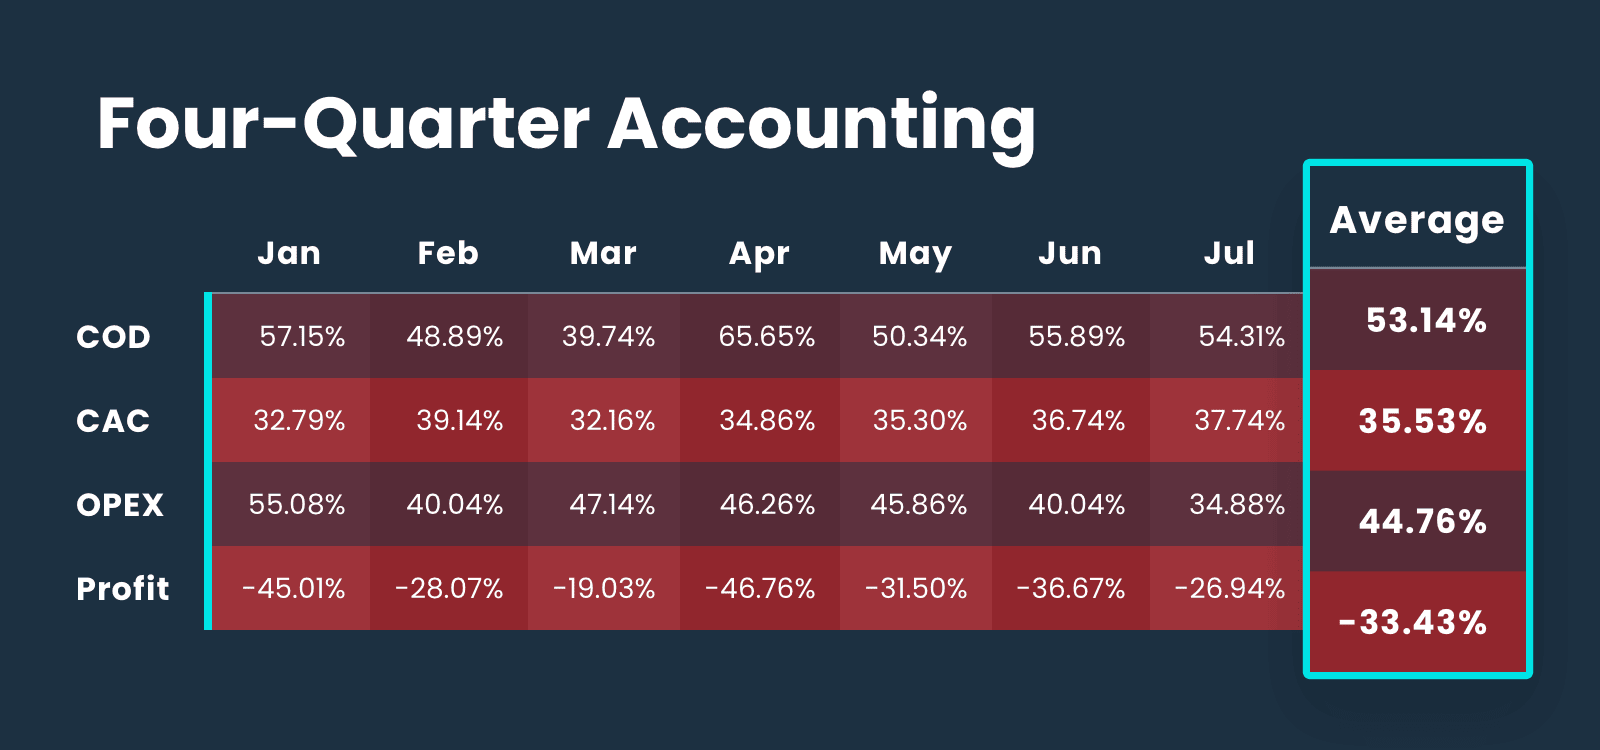 Four-Quarter Accounting average first six months